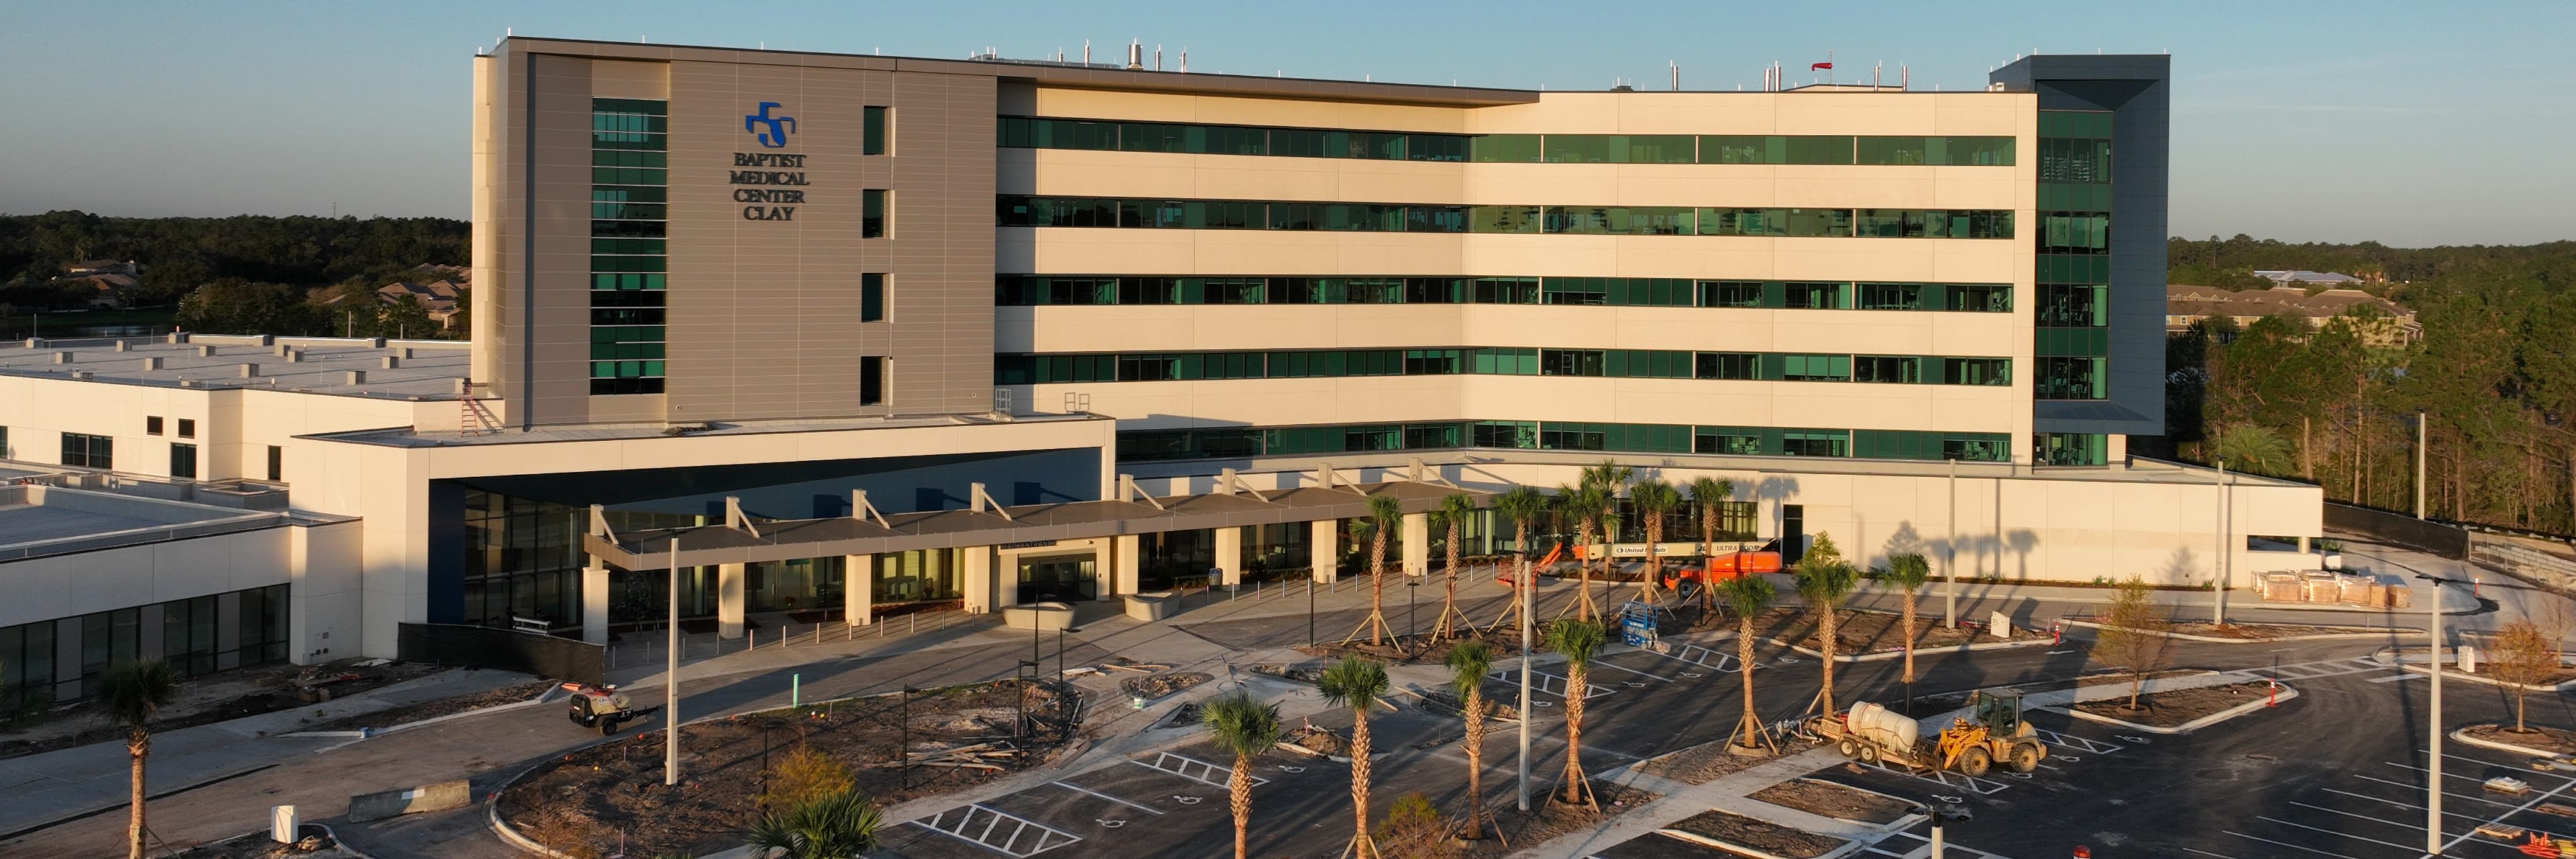 aerial photograph of the Baptist Medical Center Clay building with morning light shining on the front of building and blue skies behind.